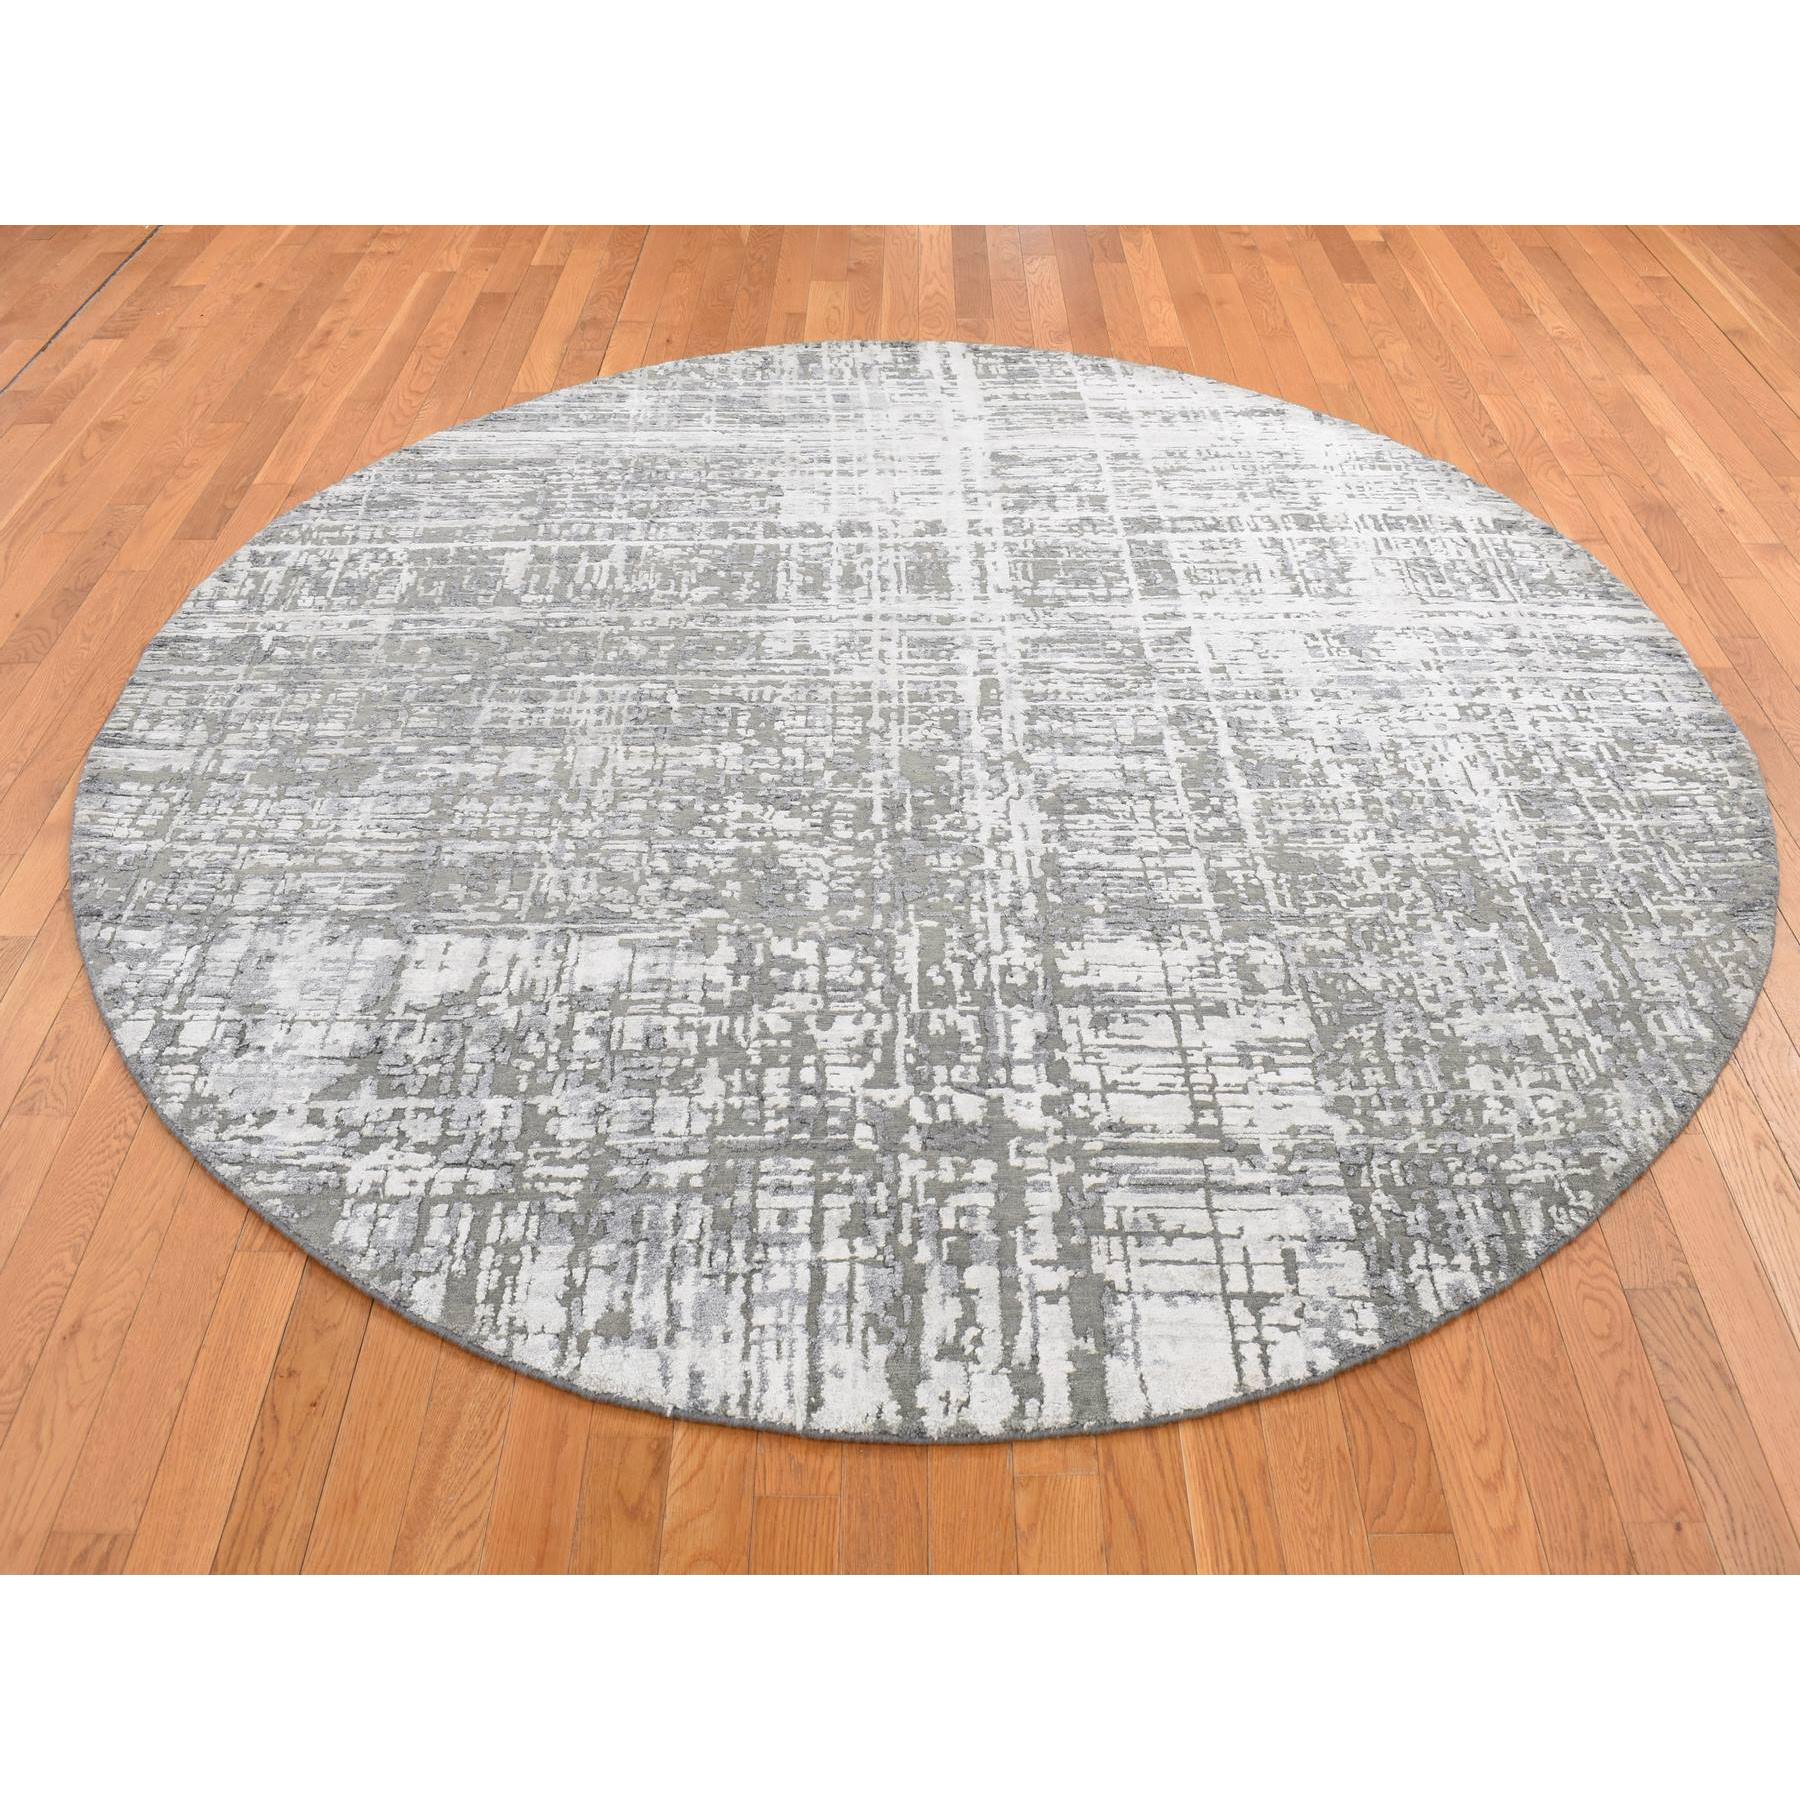 8'2"x8'2" Carbon Gray, Wool and Silk, Abstract Criss Cross Design, Hand Woven, Round Oriental Rug 